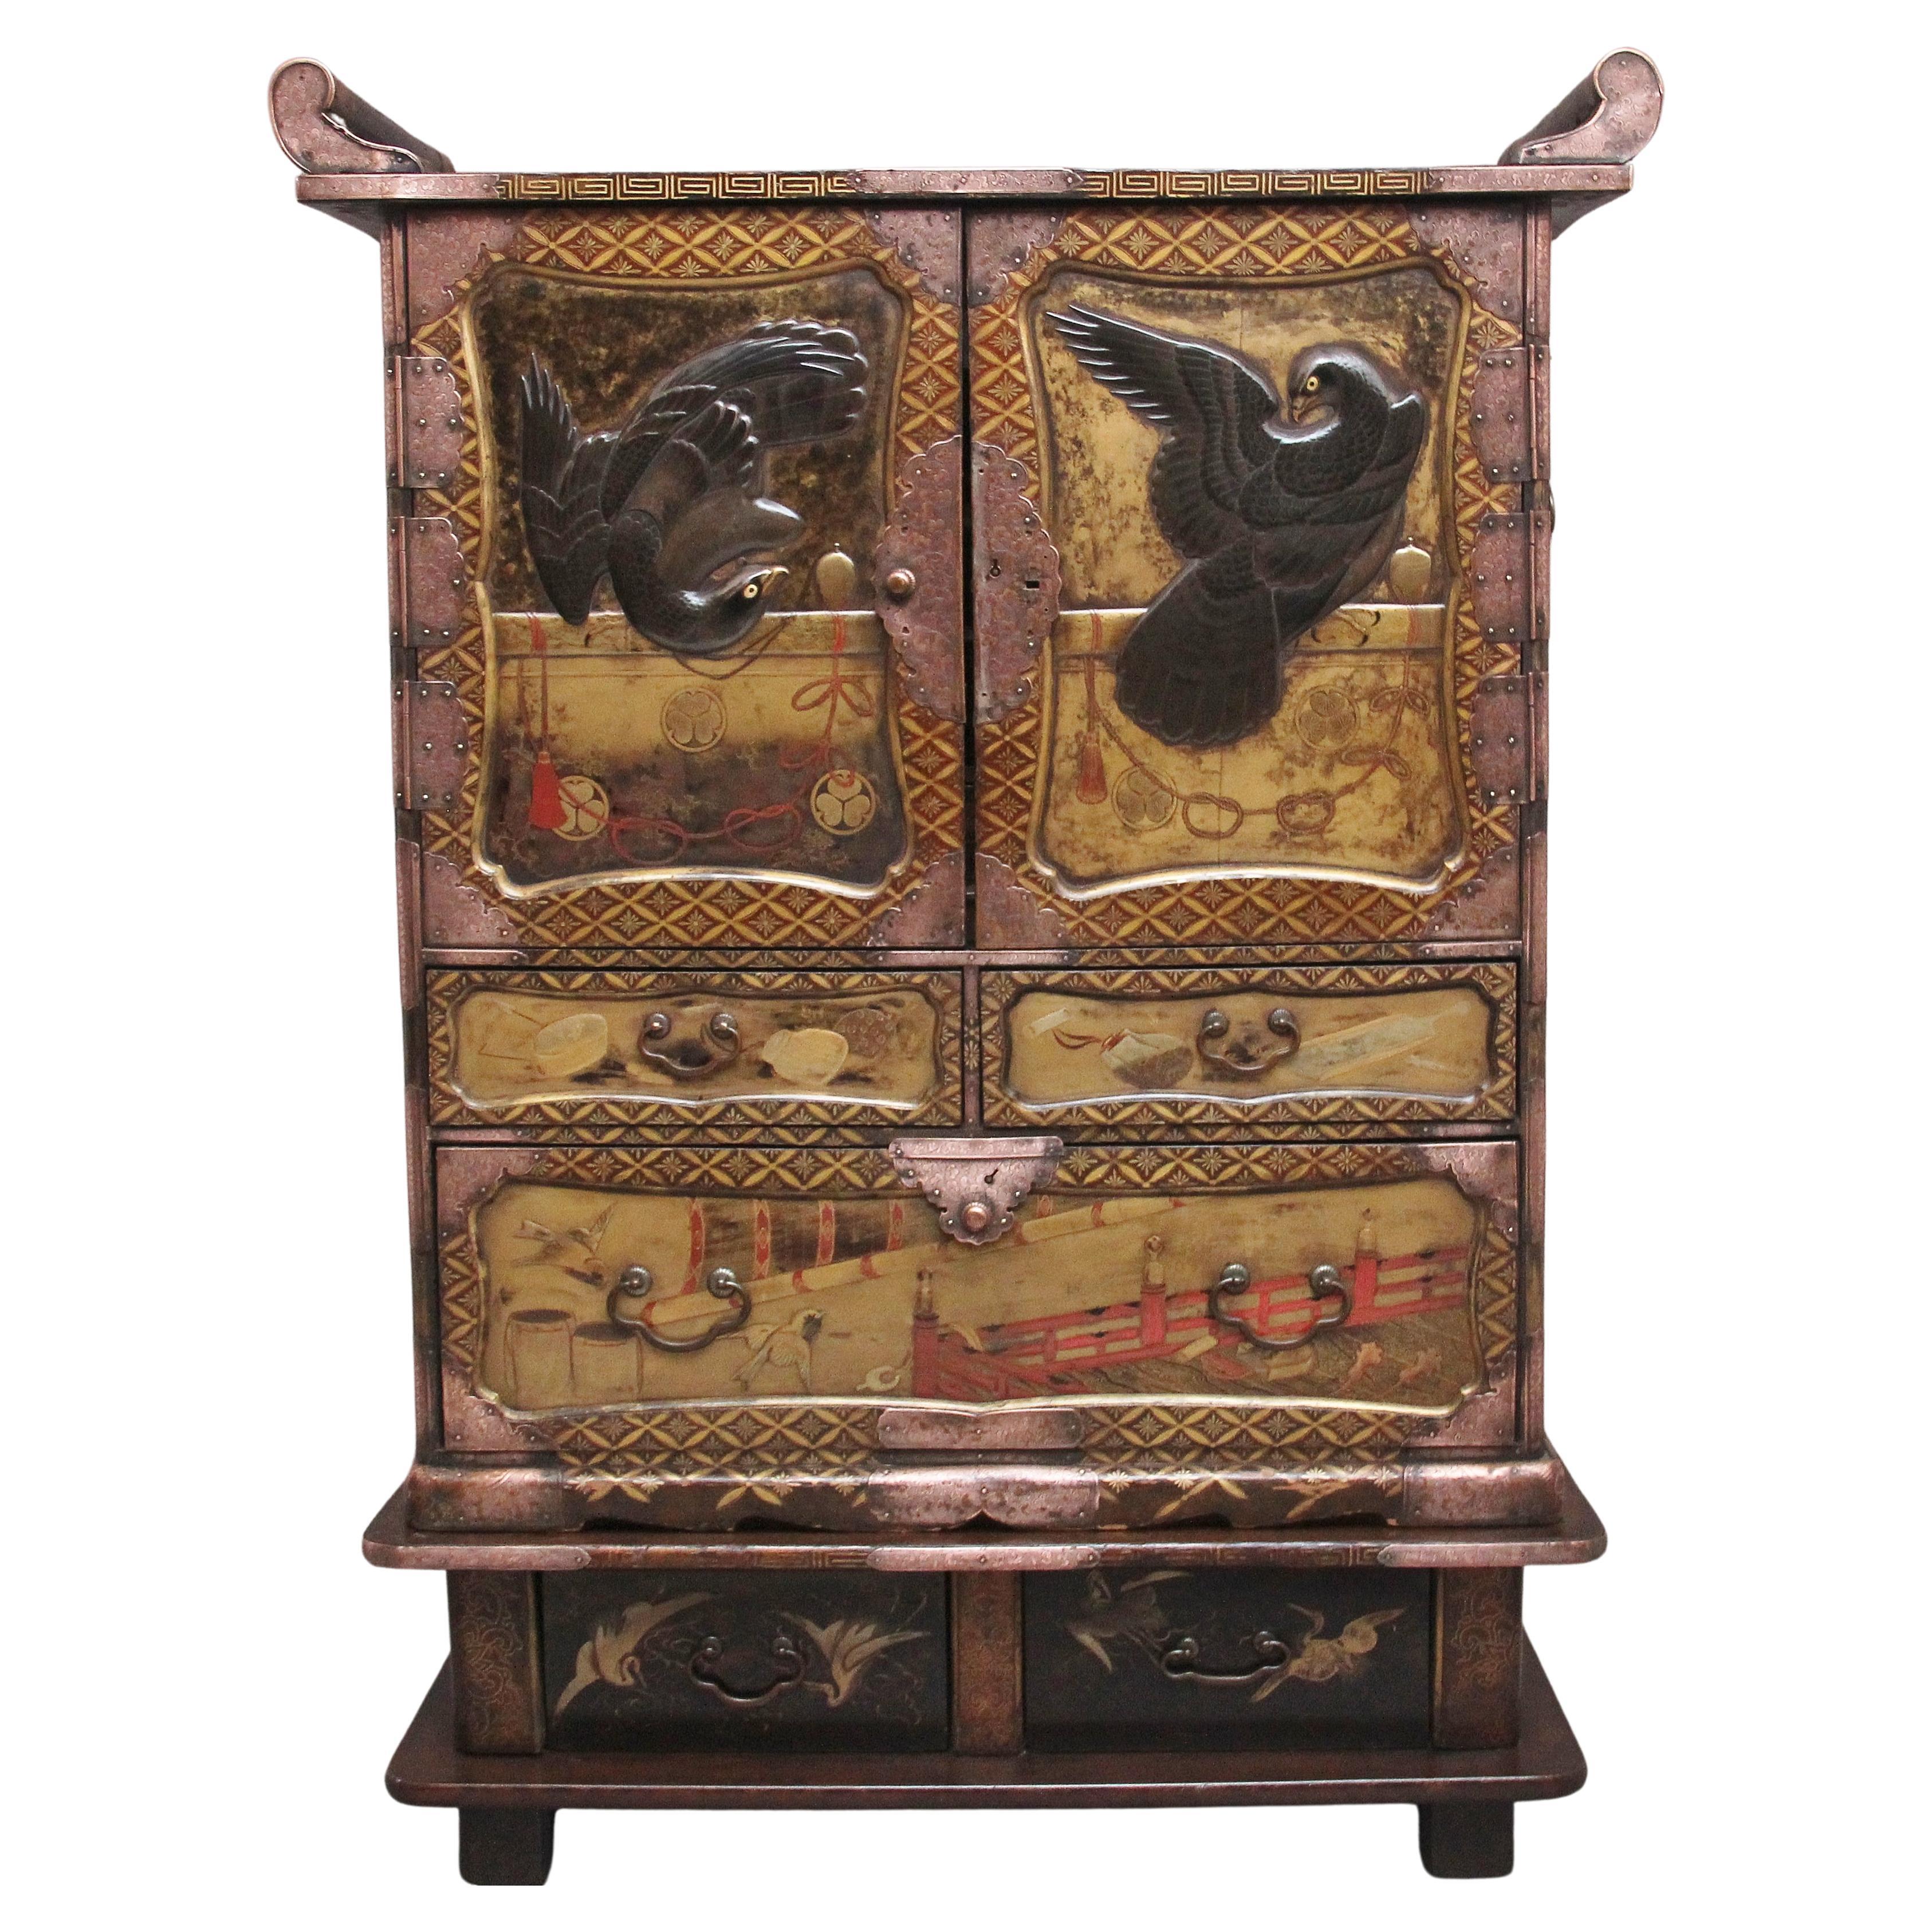 19th Century Japanese gilt lacquered cabinet